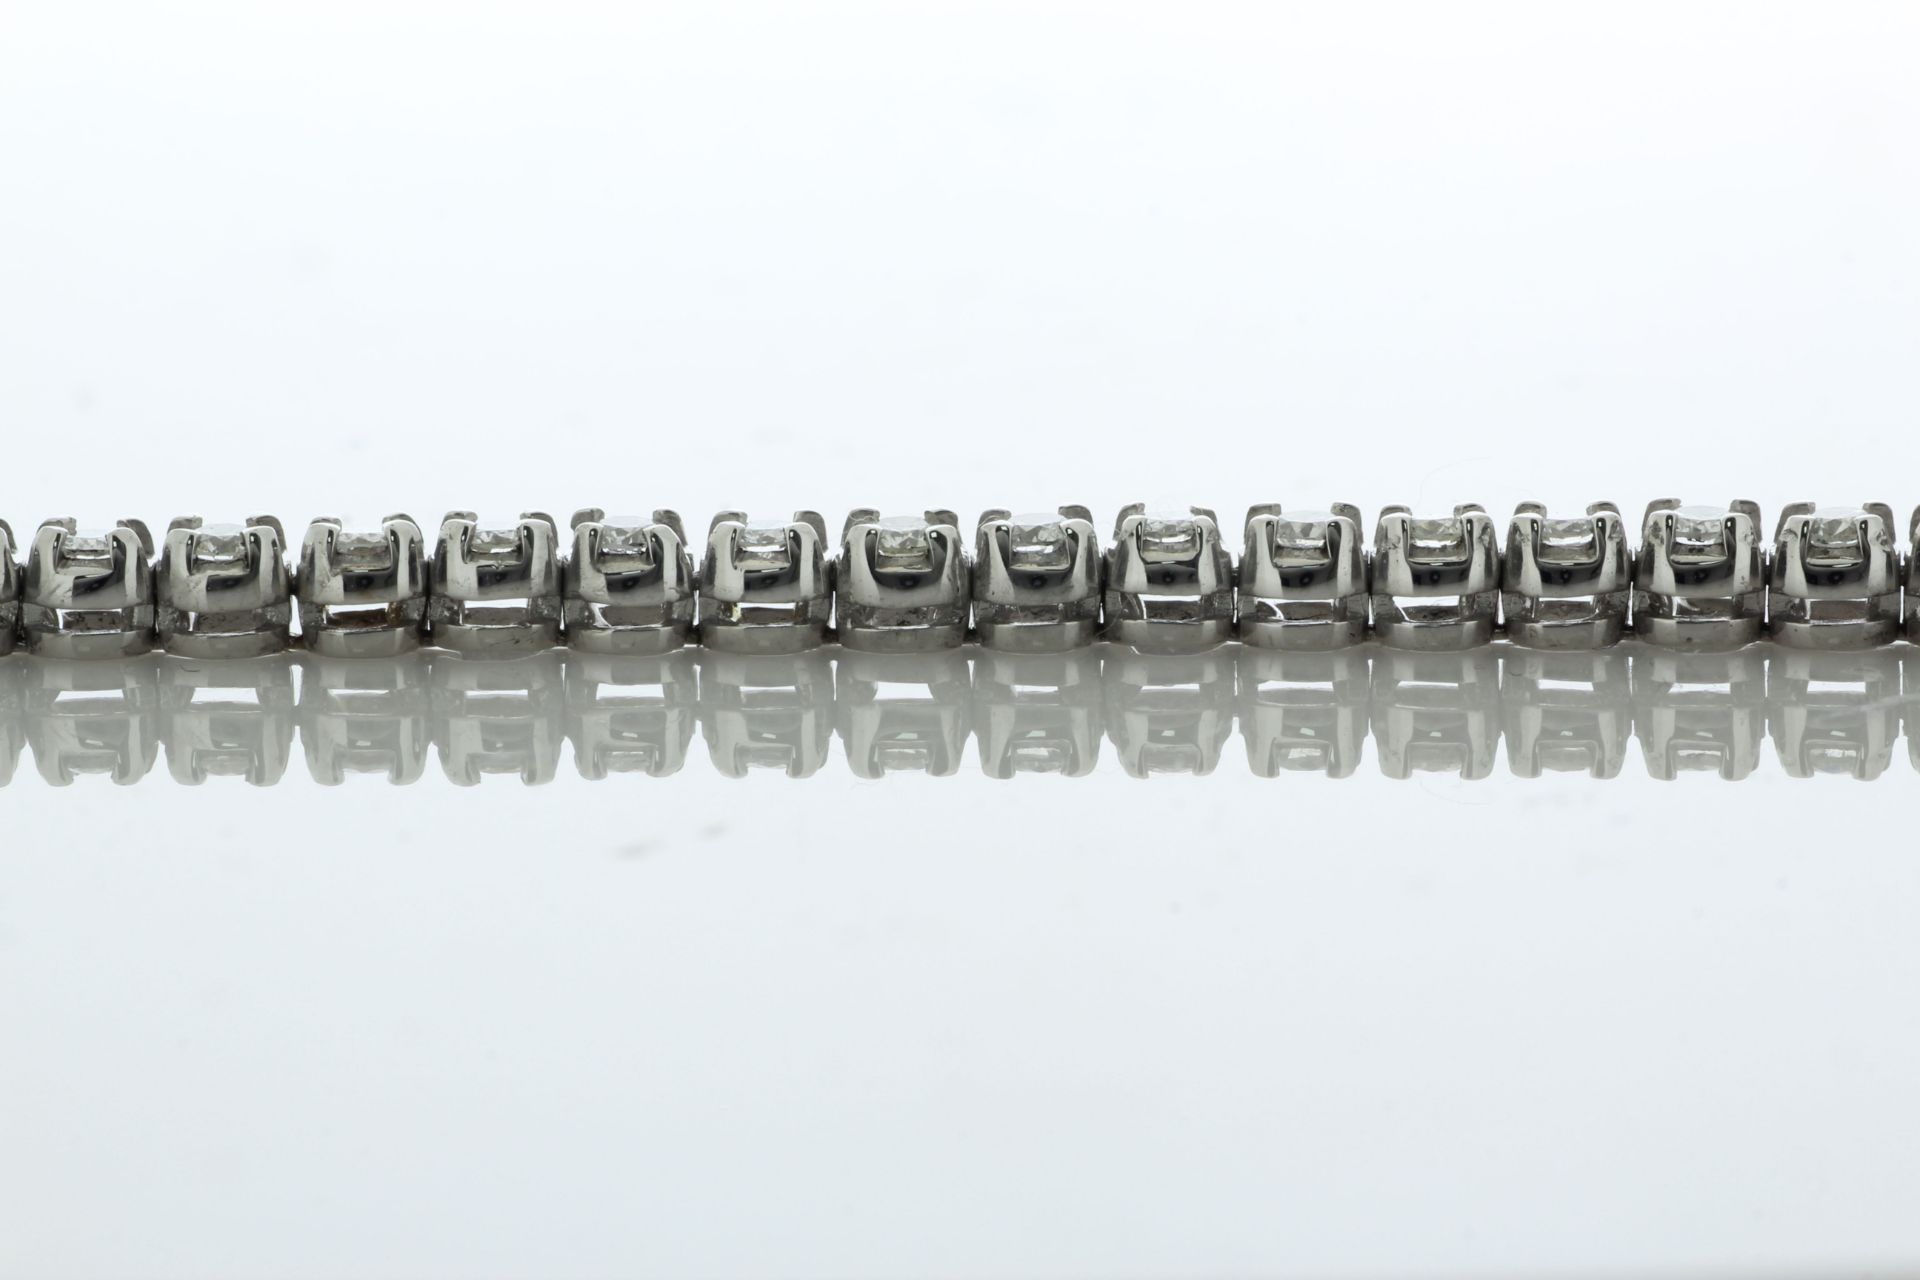 18ct White Gold Tennis Diamond Bracelet 2.39 Carats - Valued By GIE £18,465.00 - Fifty one round - Image 4 of 5